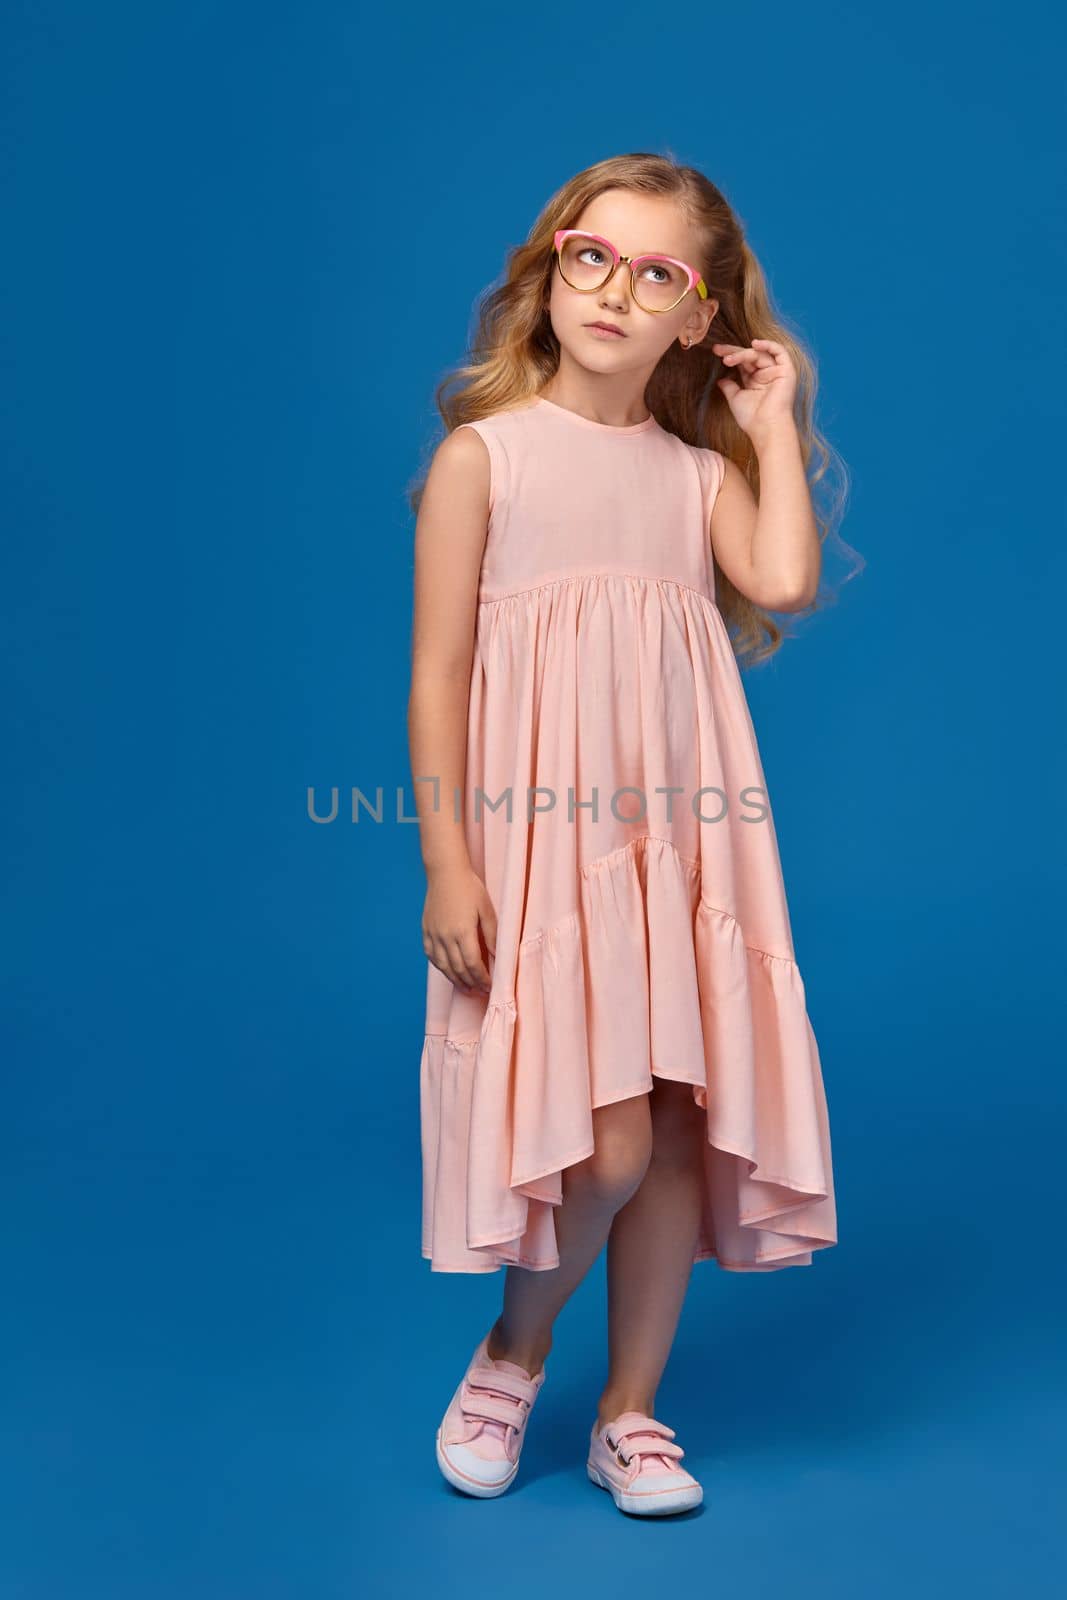 Fashionable little girl in a pink dress and glasses is standing on a blue background. by nazarovsergey